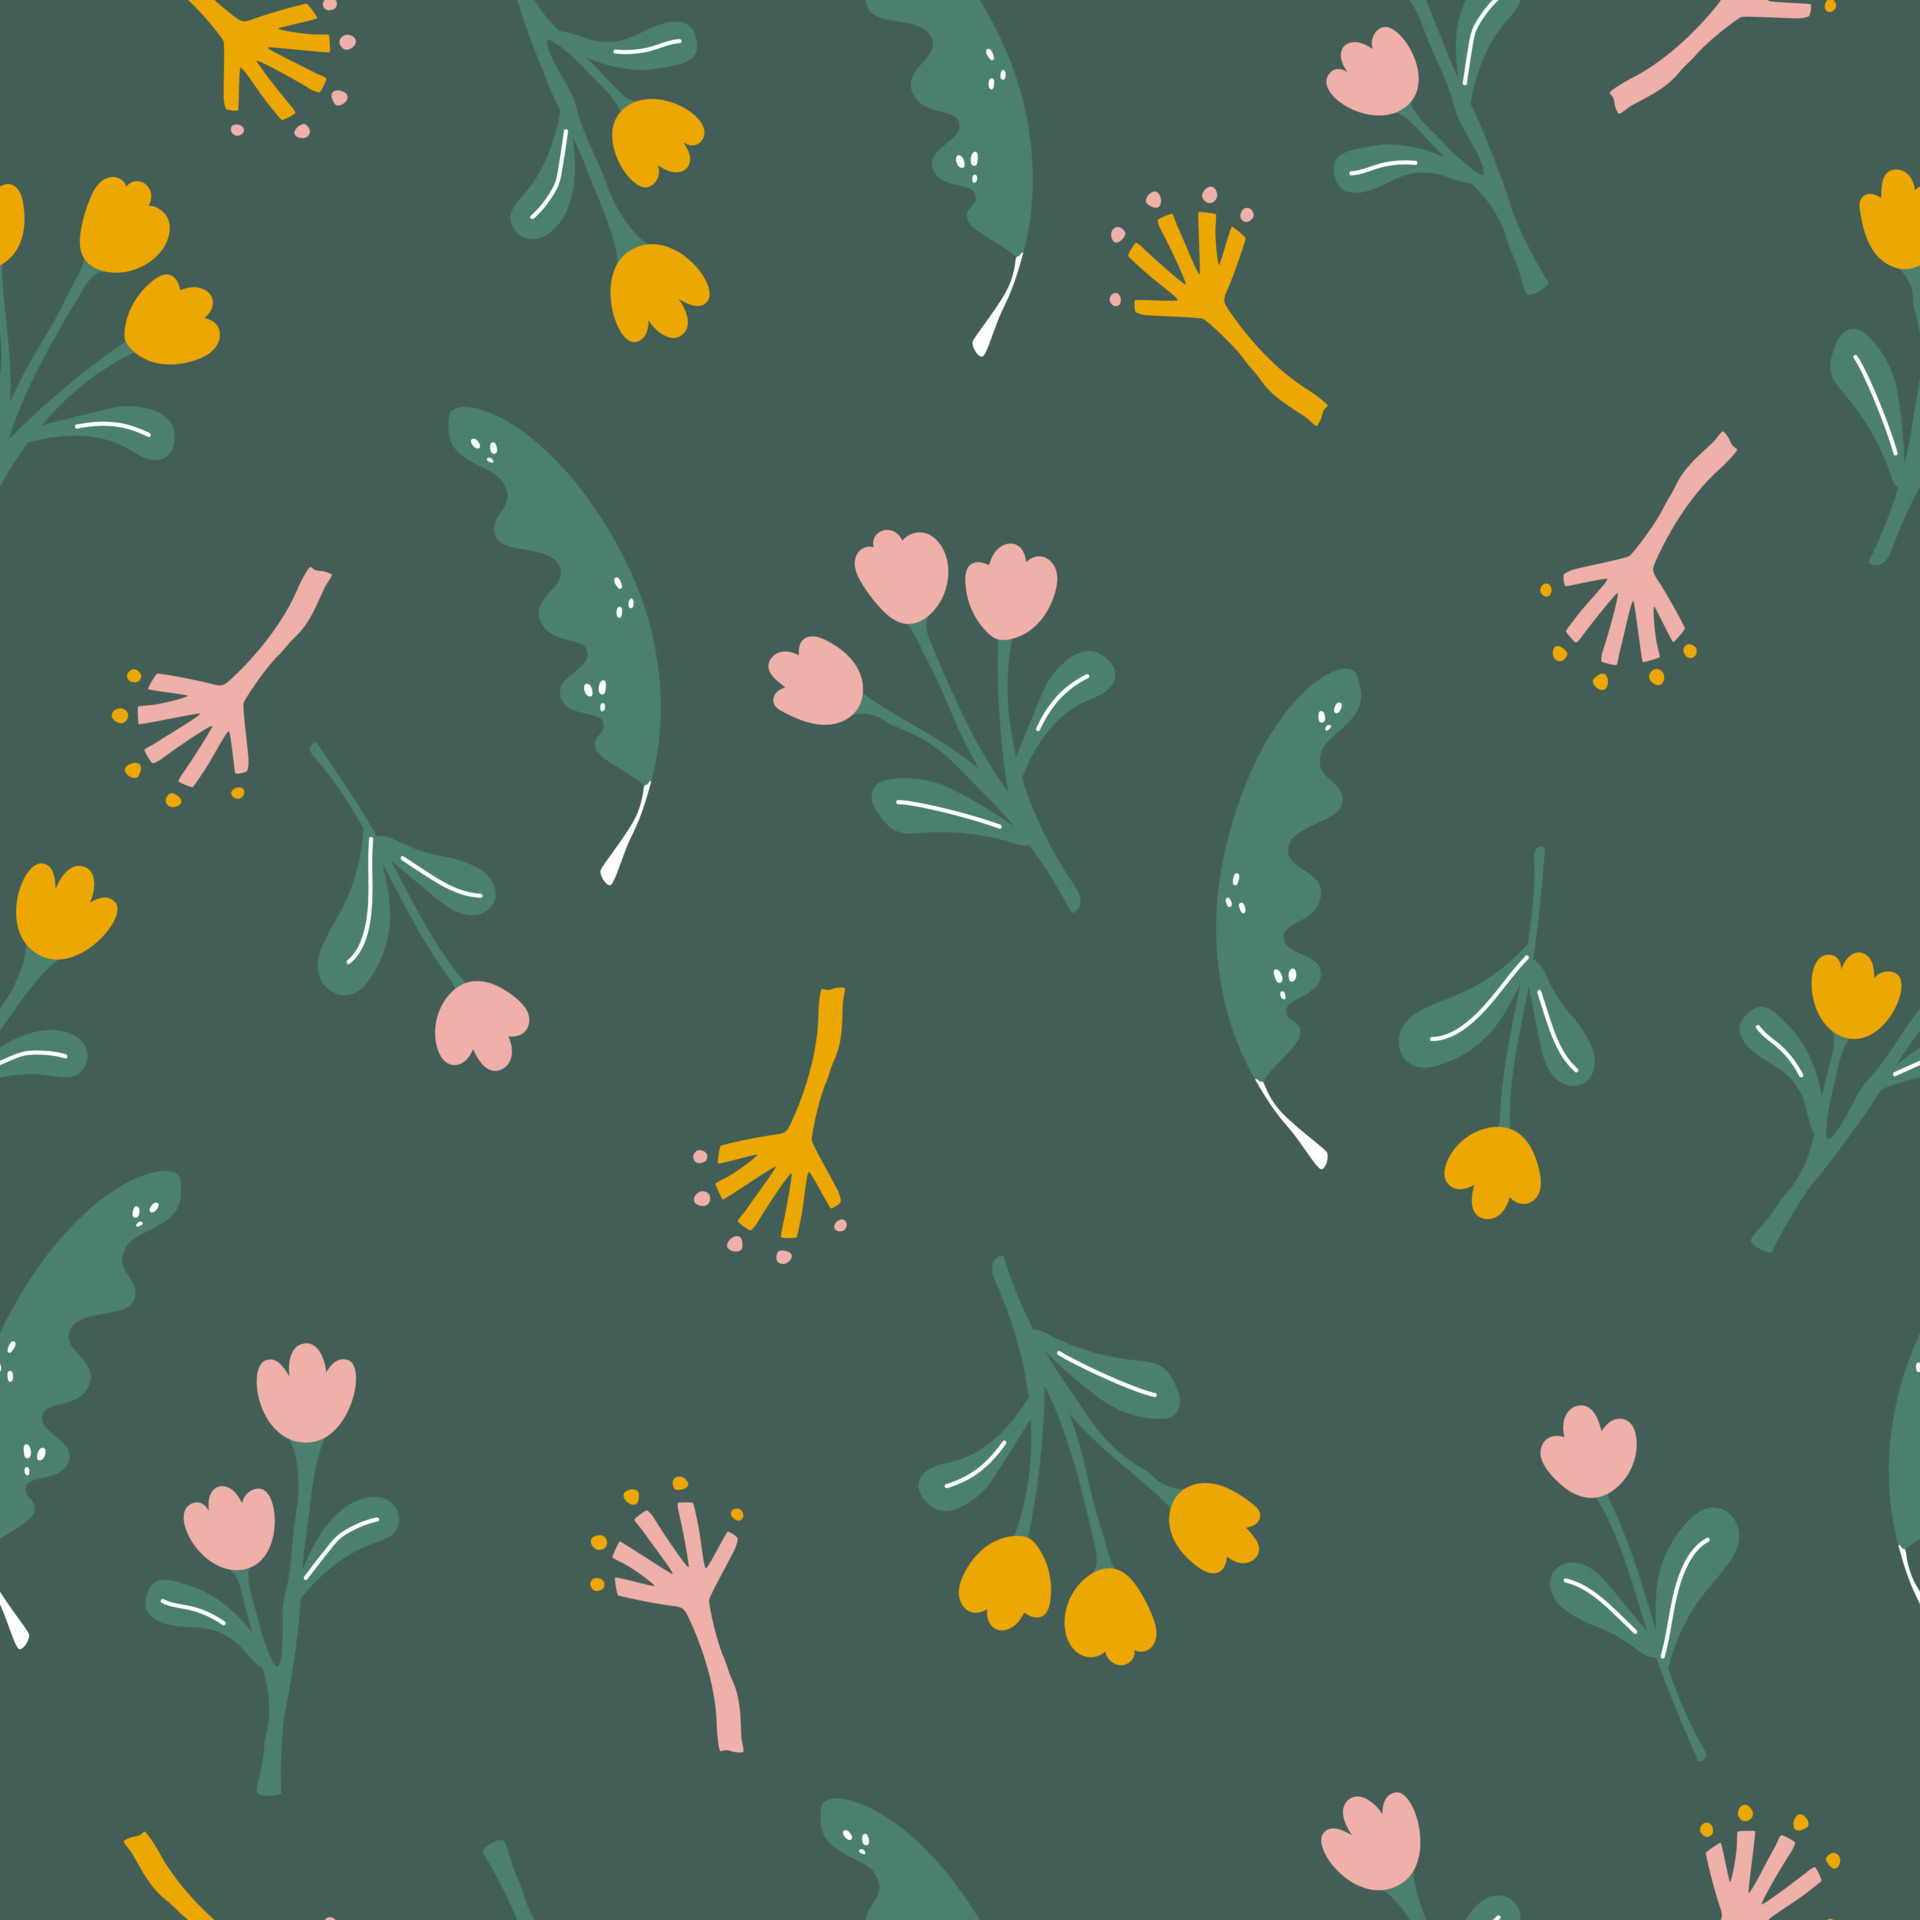 A green background with pink and yellow flowers - 60s